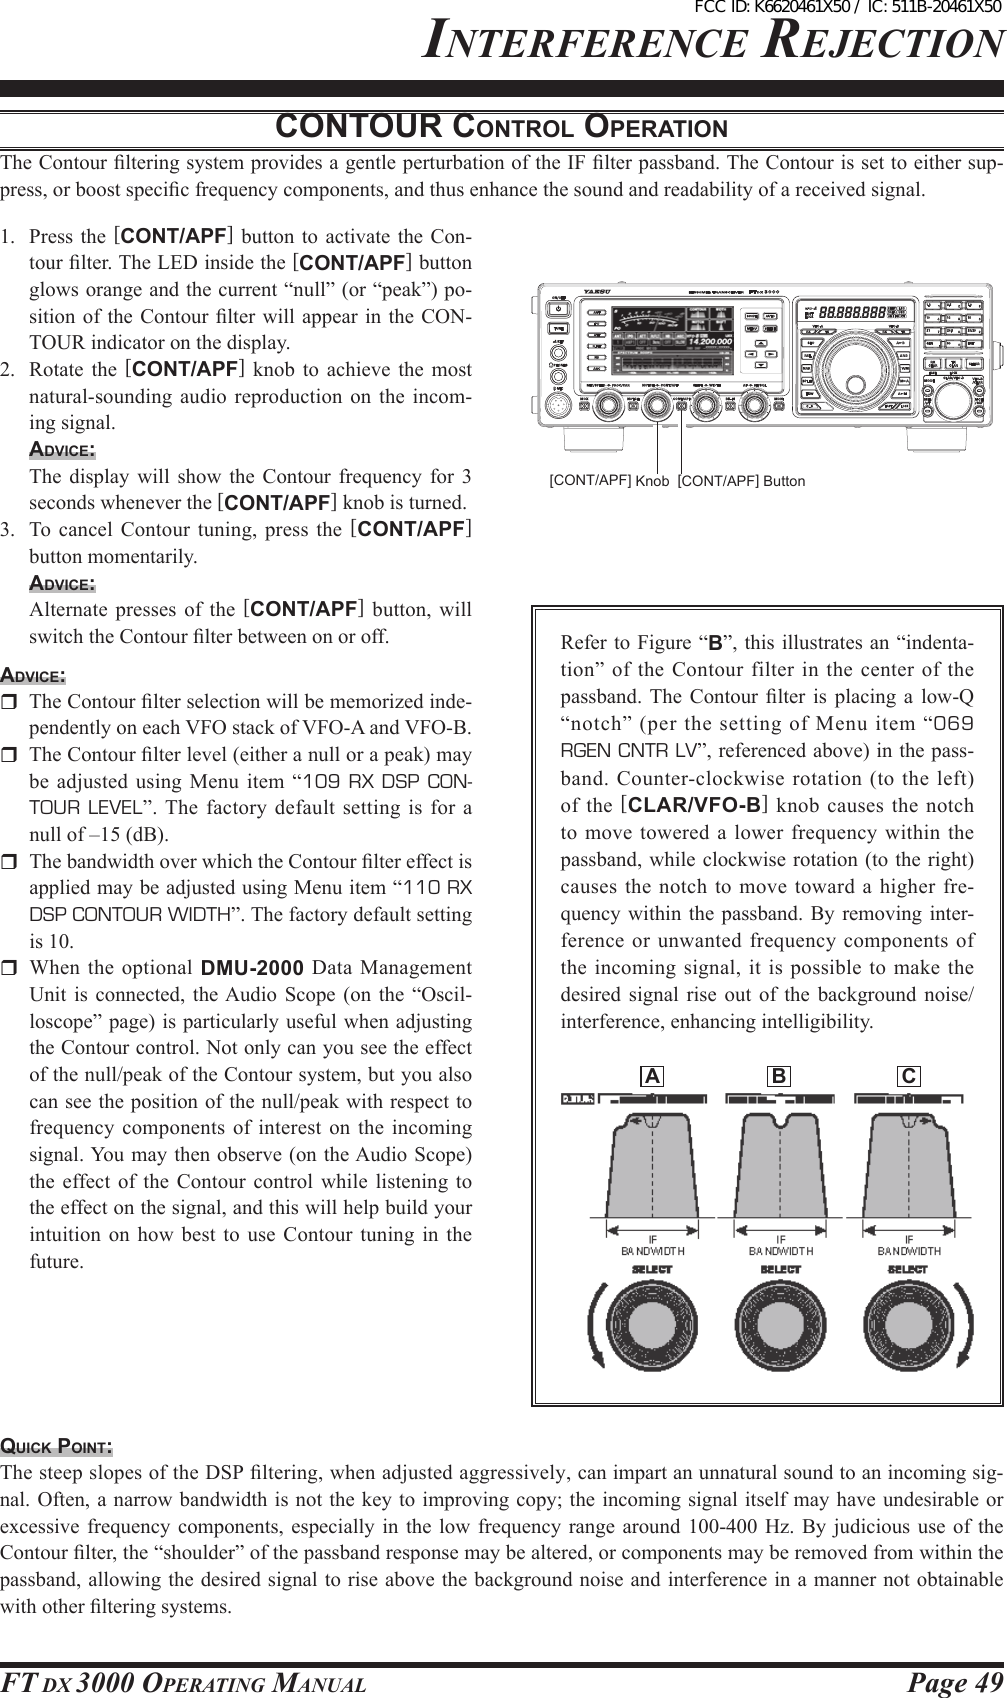 Page 49FT DX 3000 OperaTing ManualinTerFerence rejecTiOncoNtouR coNtRol opeRAtioNThe Contour ltering system provides a gentle perturbation of the IF lter passband. The Contour is set to either sup-press, or boost specic frequency components, and thus enhance the sound and readability of a received signal.1.  Press the [CONT/APF] button to activate the Con-tour lter. The LED inside the [CONT/APF] button glows orange and the current “null” (or “peak”) po-sition of the Contour  lter  will appear in the CON-TOUR indicator on the display.2.  Rotate  the  [CONT/APF]  knob  to  achieve  the  most natural-sounding audio  reproduction  on  the incom-ing signal.Advice:  The  display  will  show  the  Contour  frequency  for  3 seconds whenever the [CONT/APF] knob is turned.3.  To cancel Contour tuning, press the  [CONT/APF] button momentarily.Advice:  Alternate presses  of  the  [CONT/APF]  button, will switch the Contour lter between on or off.Advice:  The Contour lter selection will be memorized inde-pendently on each VFO stack of VFO-A and VFO-B.  The Contour lter level (either a null or a peak) may be adjusted using Menu item  “109  RX  DSP  CON-TOUR LEVEL”. The factory default setting is for a null of –15 (dB).  The bandwidth over which the Contour lter effect is applied may be adjusted using Menu item “110 RX DSP CONTOUR WIDTH”. The factory default setting is 10.  When  the  optional  DMU-2000 Data  Management Unit  is  connected, the Audio  Scope  (on the  “Oscil-loscope” page) is particularly useful when adjusting the Contour control. Not only can you see the effect of the null/peak of the Contour system, but you also can see the position of the null/peak with respect to frequency  components  of  interest  on  the  incoming signal. You may then observe (on the Audio Scope) the  effect of  the  Contour  control while listening  to the effect on the signal, and this will help build your intuition on  how  best  to  use Contour tuning in the future.Refer to Figure “B”, this illustrates an “indenta-tion” of the Contour filter  in the center  of the passband. The  Contour  lter  is  placing  a  low-Q “notch”  (per  the  setting of Menu  item  “069 RGEN CNTR LV”, referenced above) in the pass-band. Counter-clockwise rotation (to  the  left) of  the  [CLAR/VFO-B] knob causes the notch to  move  towered  a  lower  frequency  within  the passband, while  clockwise rotation (to the right) causes the notch  to move toward a higher fre-quency within the passband. By removing inter-ference or unwanted frequency components of the incoming signal, it is possible to make  the desired  signal  rise out  of  the  background  noise/interference, enhancing intelligibility.QuicK poiNt:The steep slopes of the DSP ltering, when adjusted aggressively, can impart an unnatural sound to an incoming sig-nal. Often, a narrow  bandwidth is not the key to improving  copy; the incoming signal itself may have undesirable or excessive frequency  components,  especially  in the low  frequency  range  around  100-400 Hz. By  judicious  use  of the Contour lter, the “shoulder” of the passband response may be altered, or components may be removed from within the passband, allowing the desired signal to rise above the background noise and interference in a manner not obtainable with other ltering systems.[CONT/APF] Button[CONT/APF] Knob  A  B  CFCC ID: K6620461X50 / IC: 511B-20461X50